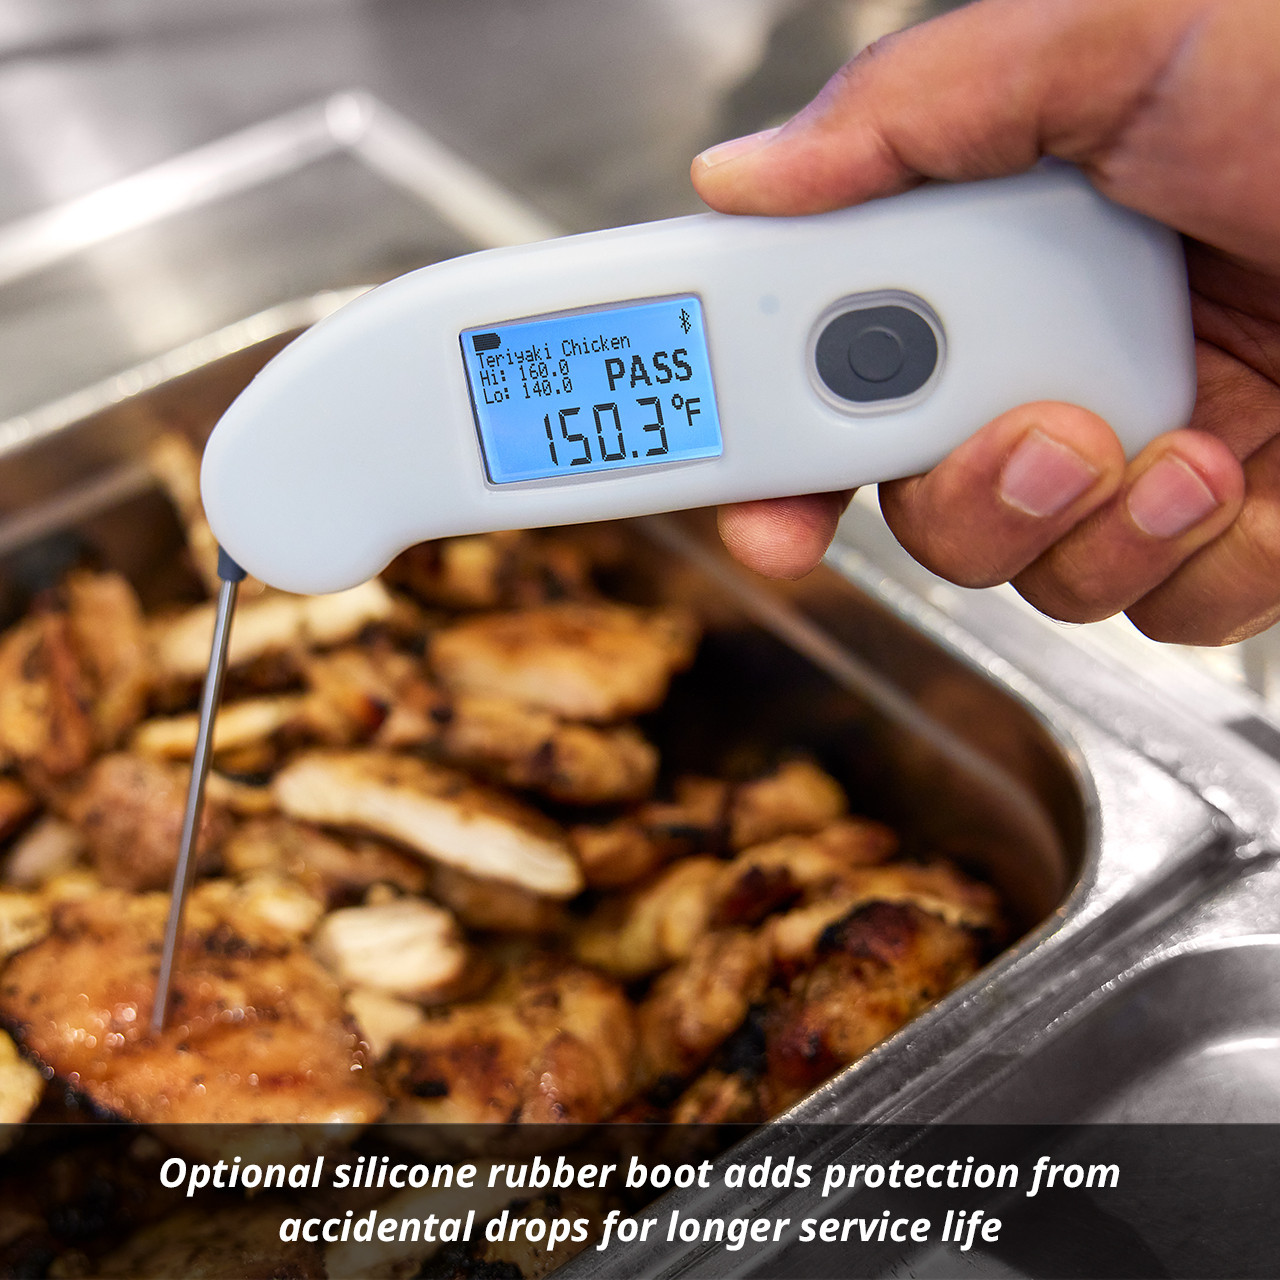 Thermapen® IR Blue - Bluetooth Infrared Temperature Probe - ThermoWorks